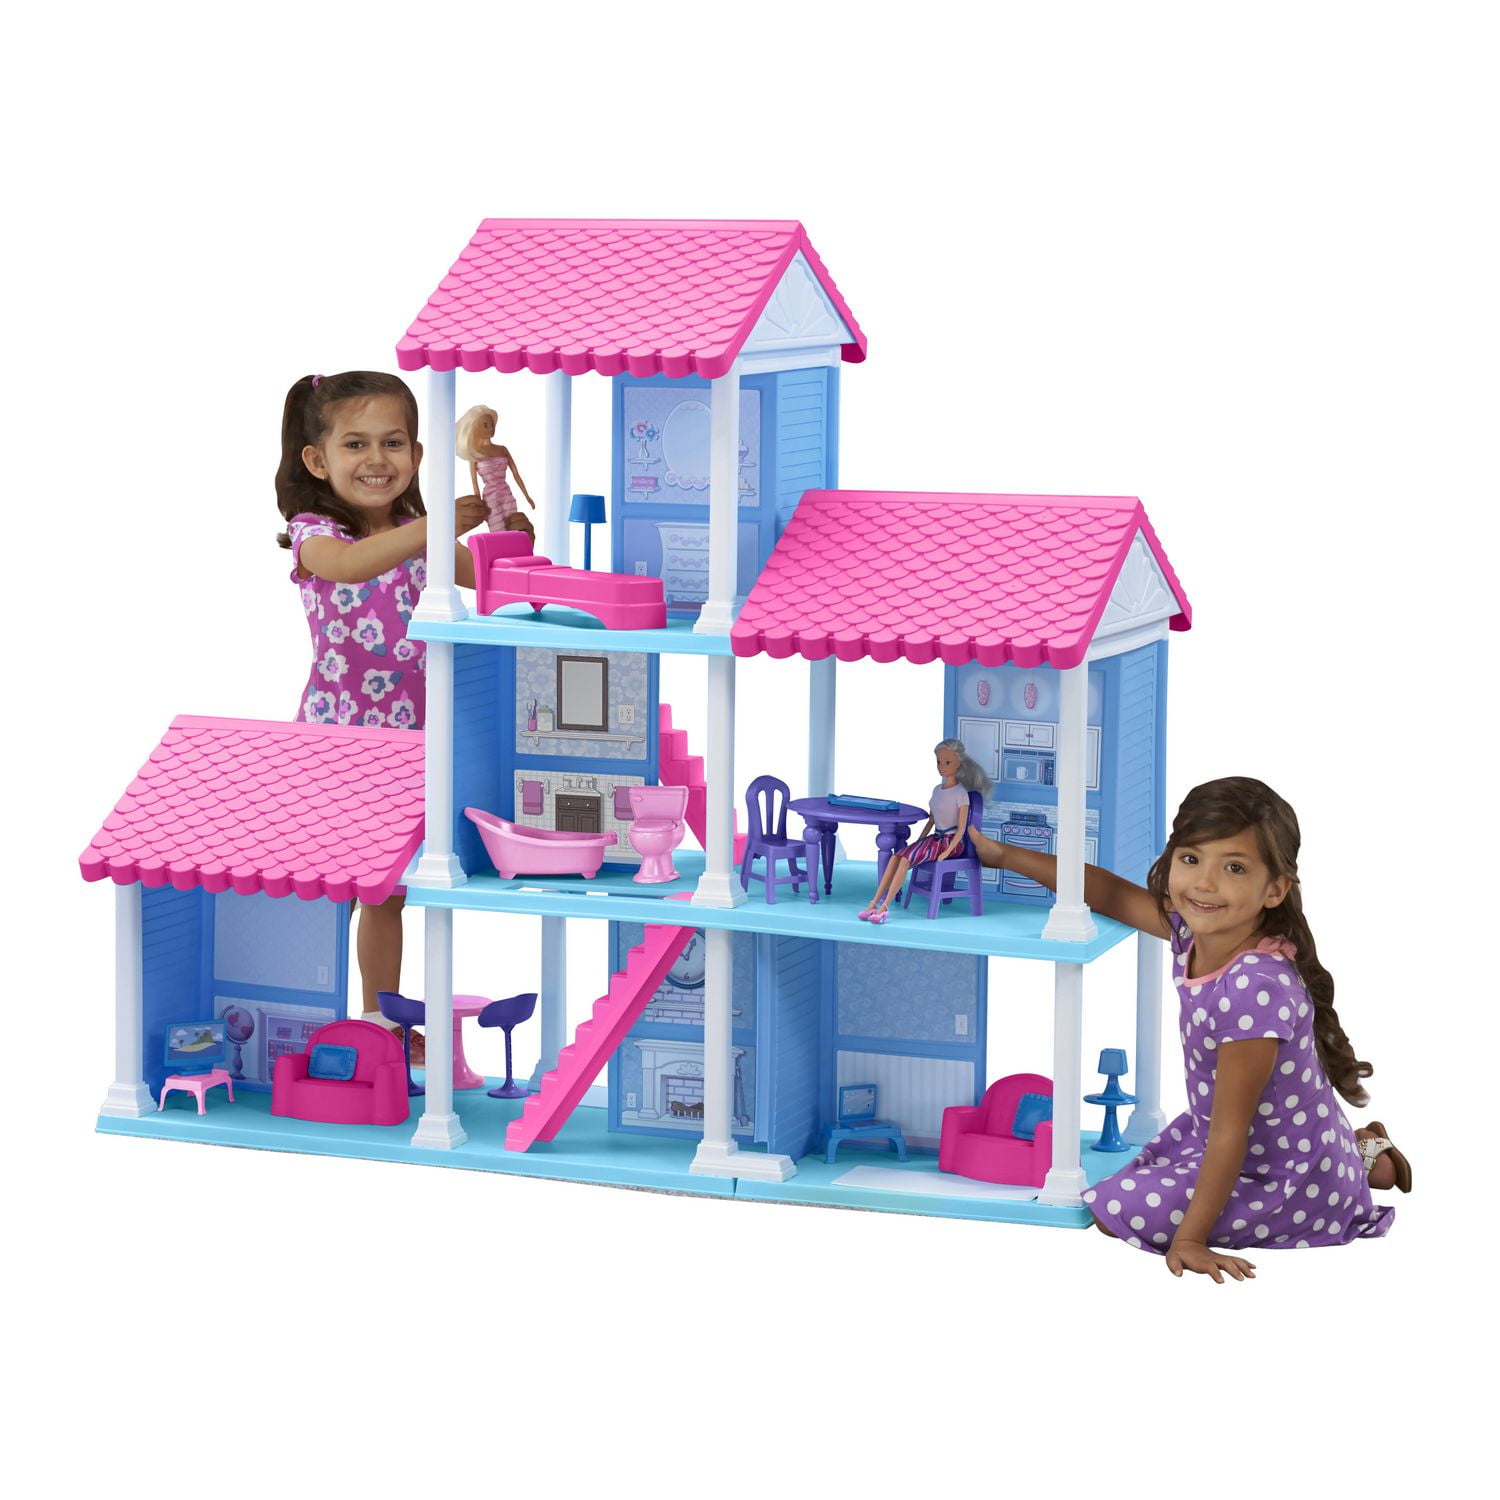 Gabby's Dollhouse, Dress-Up Closet Portable Playset with a Gabby Doll,  Surprise Toys and Photo Shoot Accessories, Kids Toys for Ages 3 and up,  Portable Playset 